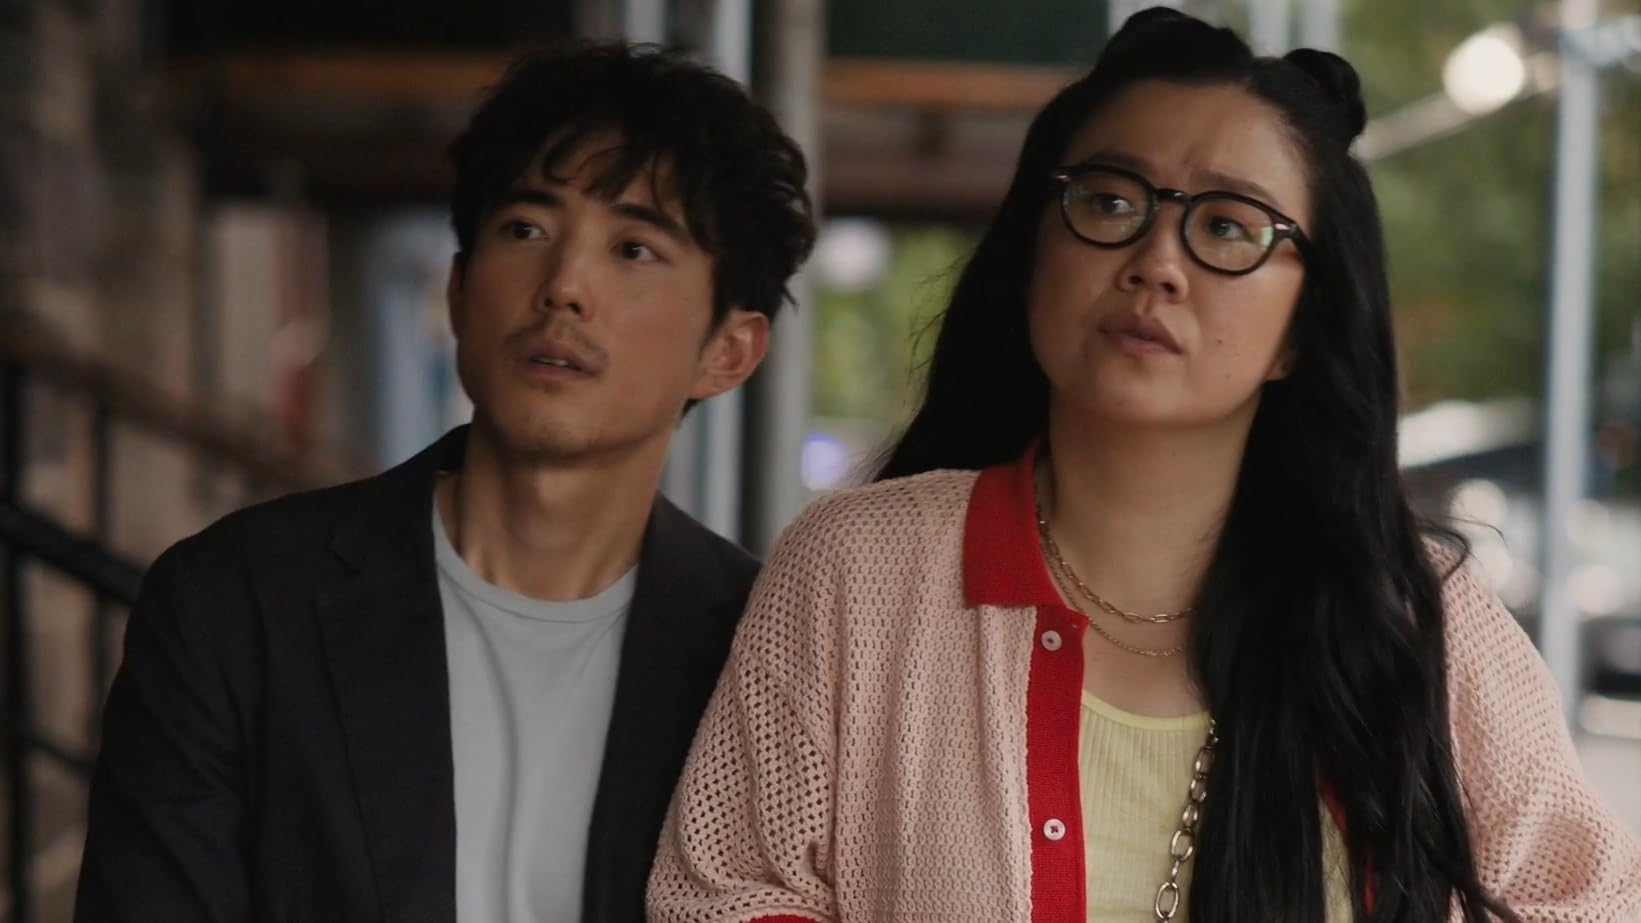 Two actors in a scene, man in a suit and woman in a cardigan and glasses, looking to their left with concerned expressions